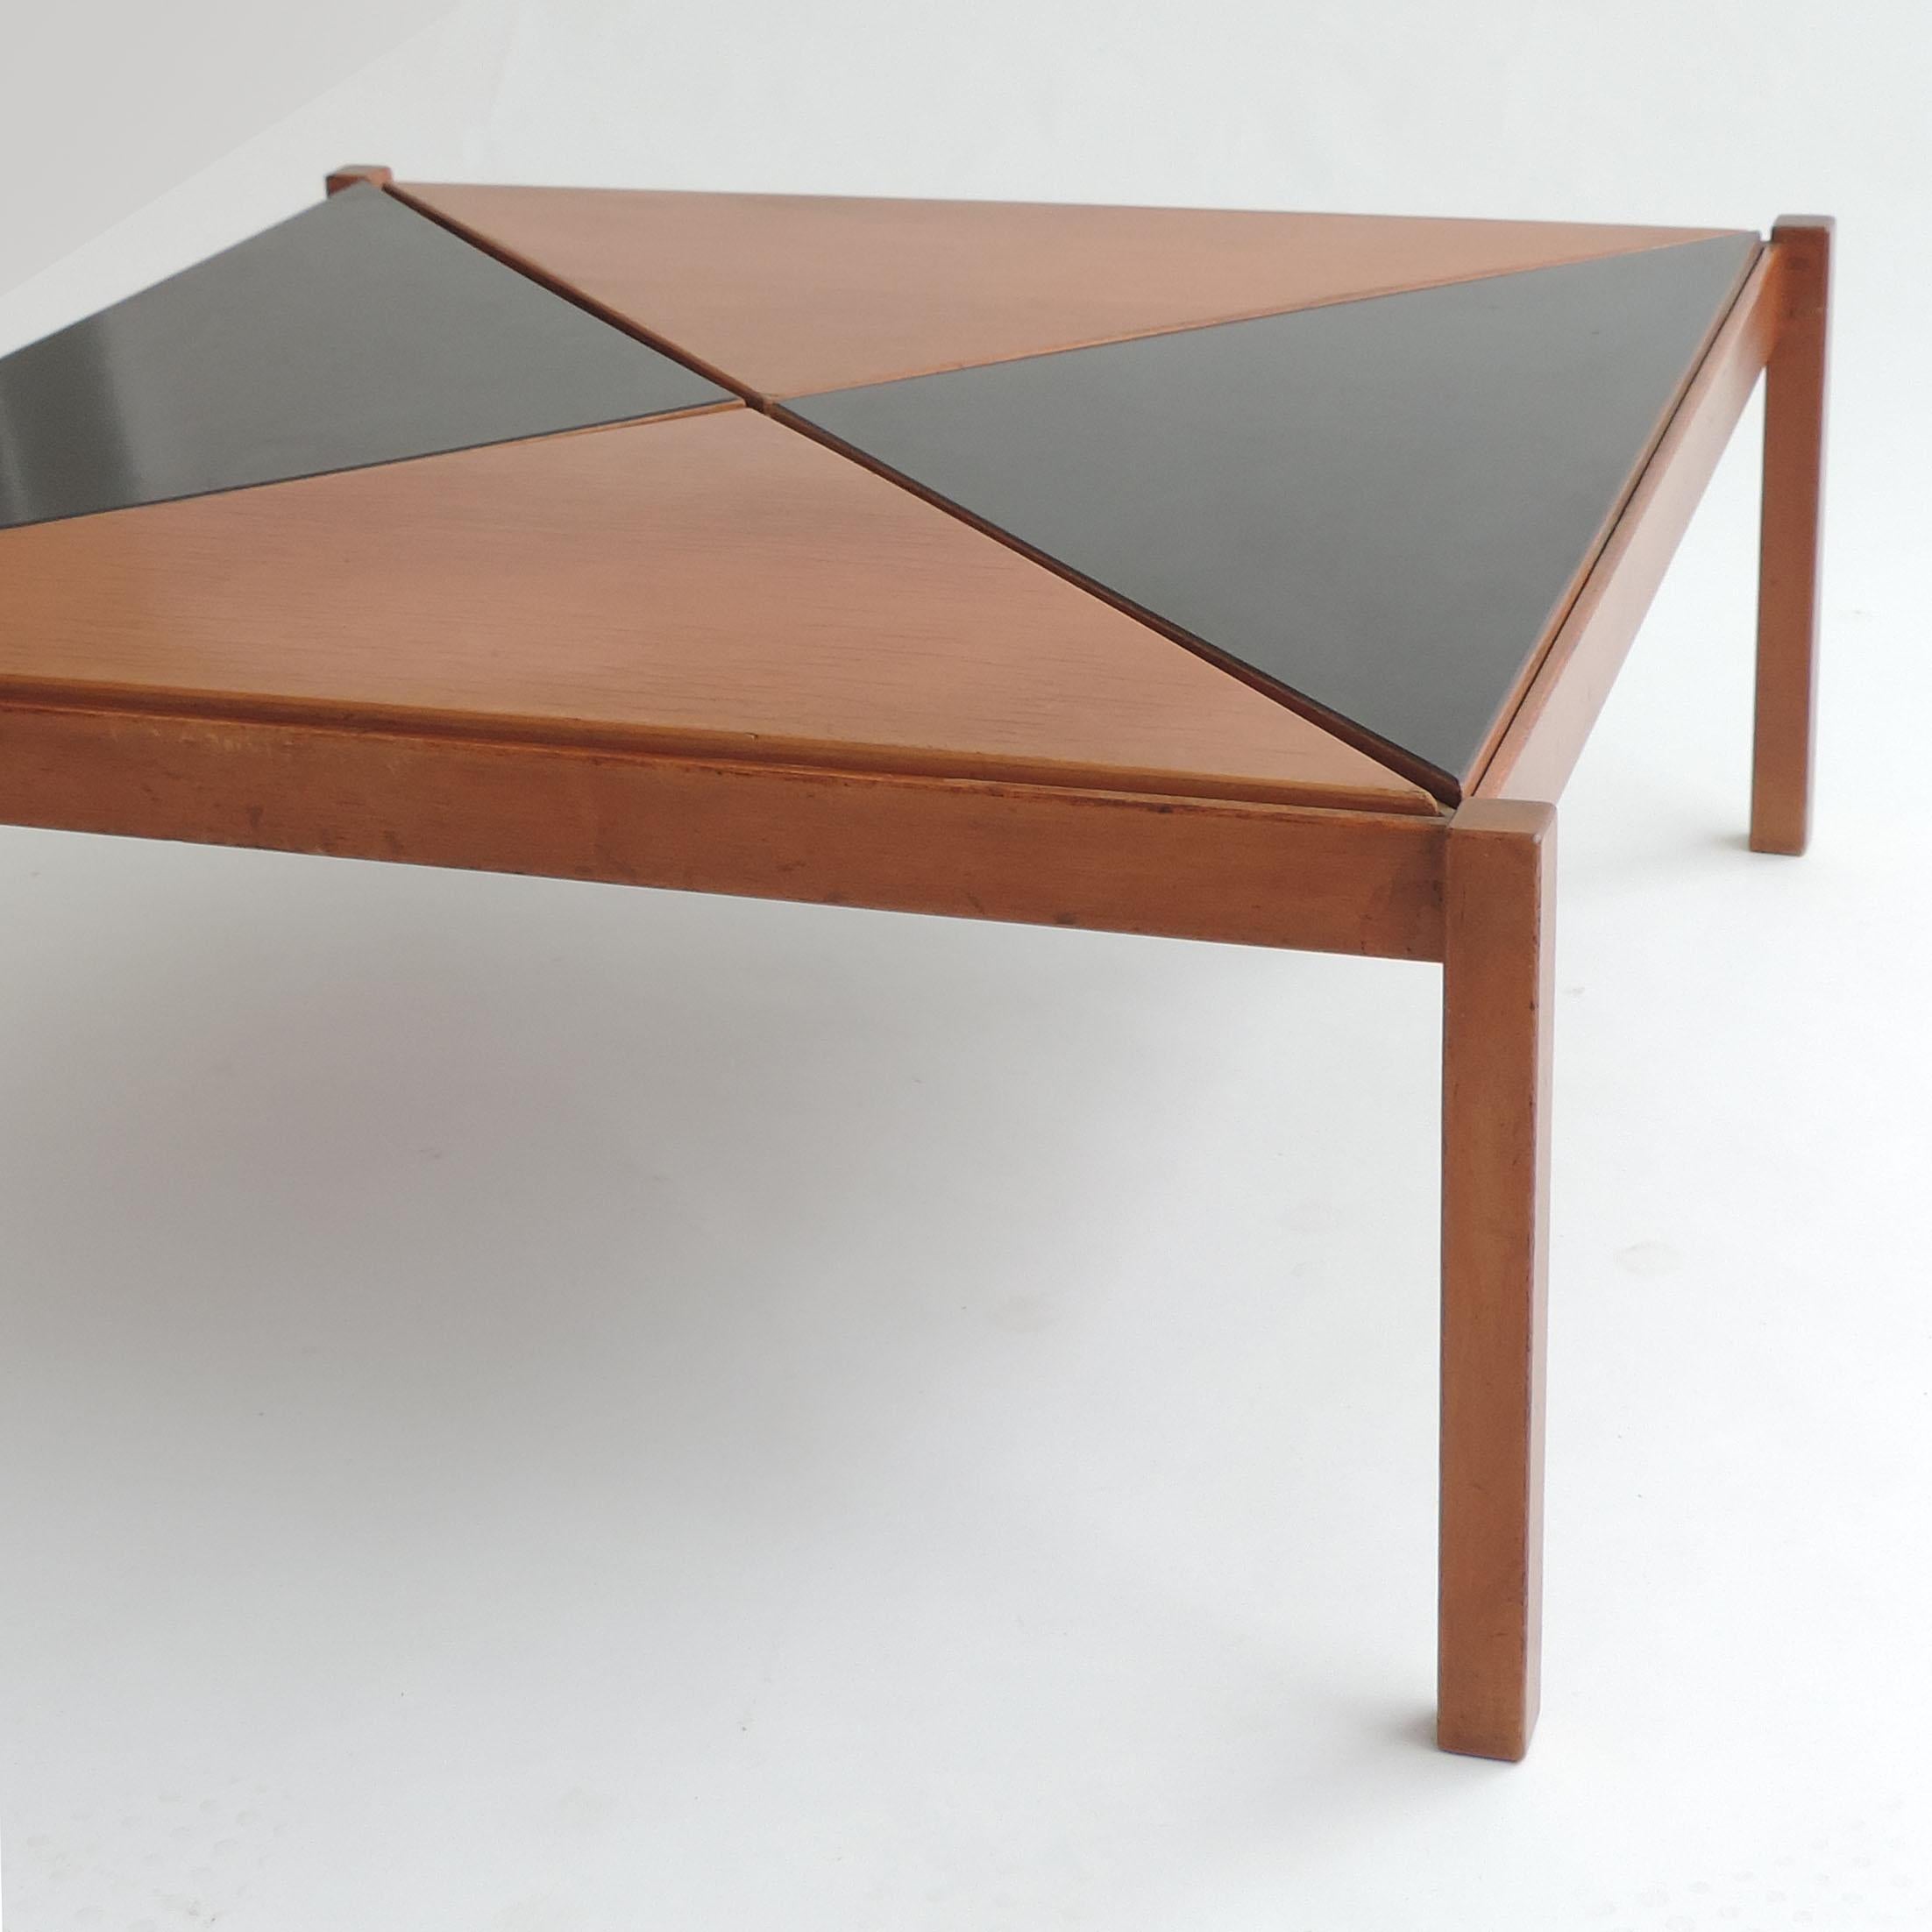 Rare Architect Gianfranco Frattini coffee table for Cantieri Carugati, Italy, 1950s
Interchangeable triangles in wood and black movable as one wish to create different effects.